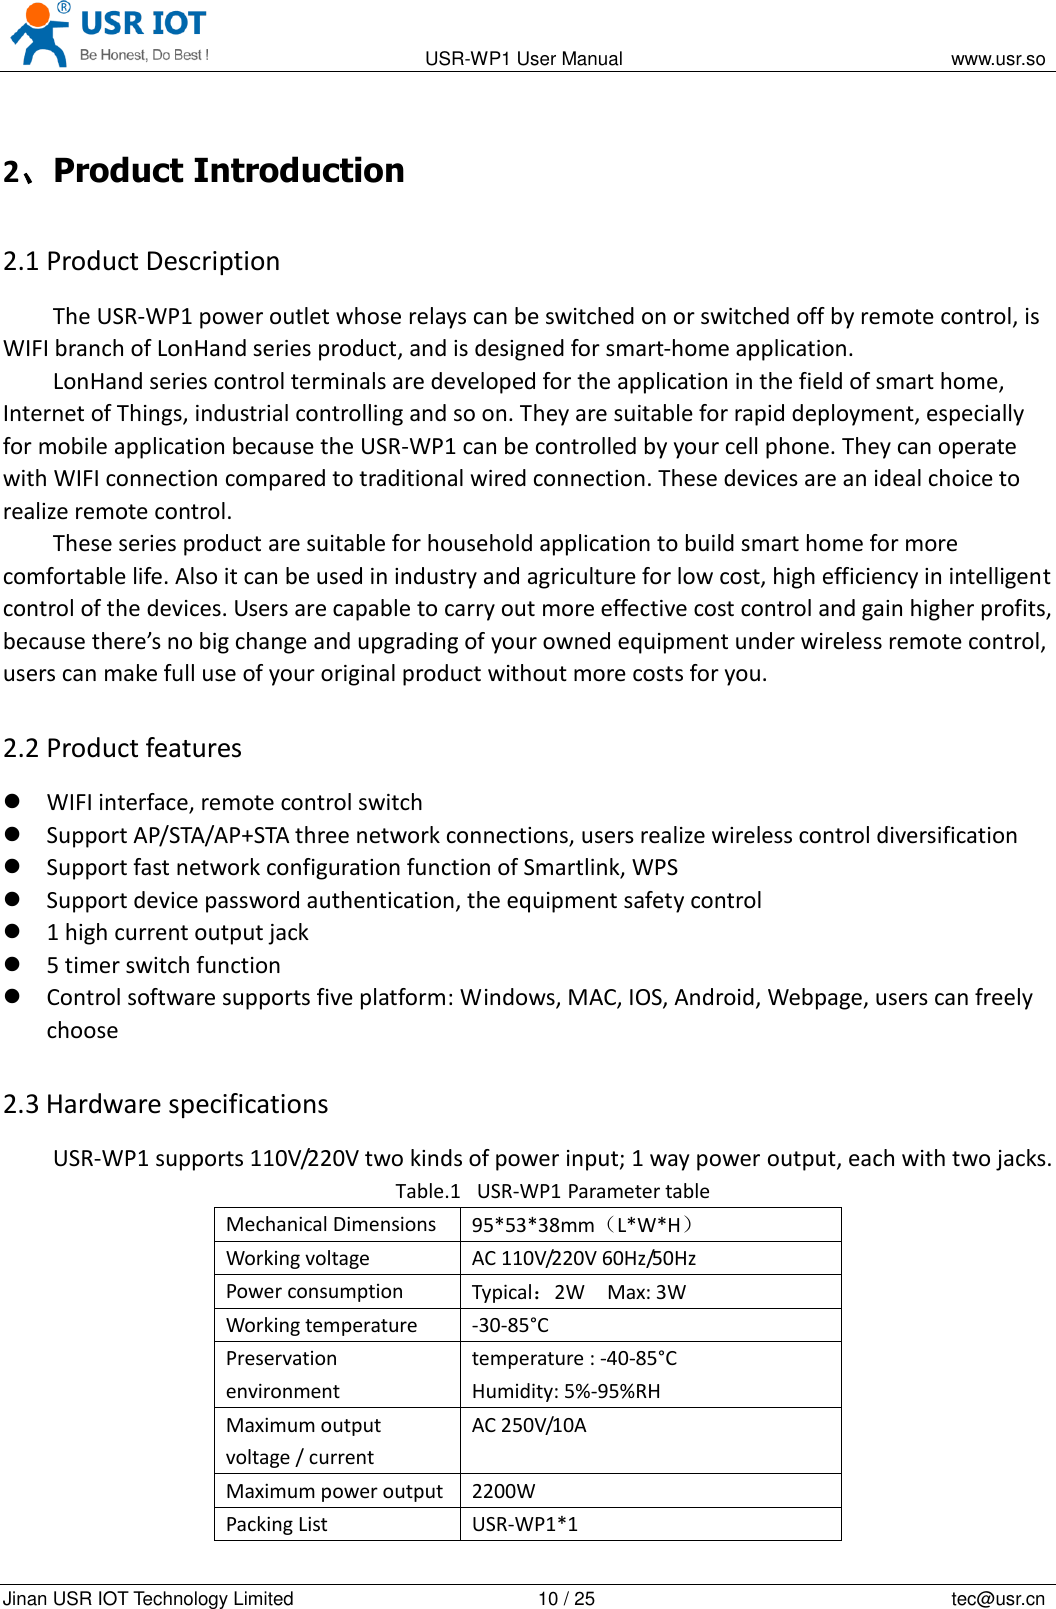                                                                                           USR-WP1 User Manual                                                                    www.usr.so   Jinan USR IOT Technology Limited                                                 10 / 25                                                                          tec@usr.cn 2、Product Introduction 2.1 Product Description The USR-WP1 power outlet whose relays can be switched on or switched off by remote control, is WIFI branch of LonHand series product, and is designed for smart-home application.   LonHand series control terminals are developed for the application in the field of smart home, Internet of Things, industrial controlling and so on. They are suitable for rapid deployment, especially for mobile application because the USR-WP1 can be controlled by your cell phone. They can operate with WIFI connection compared to traditional wired connection. These devices are an ideal choice to realize remote control. These series product are suitable for household application to build smart home for more comfortable life. Also it can be used in industry and agriculture for low cost, high efficiency in intelligent control of the devices. Users are capable to carry out more effective cost control and gain higher profits, because there’s no big change and upgrading of your owned equipment under wireless remote control, users can make full use of your original product without more costs for you. 2.2 Product features  WIFI interface, remote control switch  Support AP/STA/AP+STA three network connections, users realize wireless control diversification  Support fast network configuration function of Smartlink, WPS  Support device password authentication, the equipment safety control  1 high current output jack  5 timer switch function  Control software supports five platform: Windows, MAC, IOS, Android, Webpage, users can freely choose 2.3 Hardware specifications USR-WP1 supports 110V/220V two kinds of power input; 1 way power output, each with two jacks. Table.1 USR-WP1 Parameter table Mechanical Dimensions 95*53*38mm（L*W*H） Working voltage AC 110V/220V 60Hz/50Hz Power consumption Typical：2W    Max: 3W Working temperature -30-85°C Preservation environment temperature : -40-85°C   Humidity: 5%-95%RH Maximum output voltage / current AC 250V/10A Maximum power output 2200W Packing List USR-WP1*1 